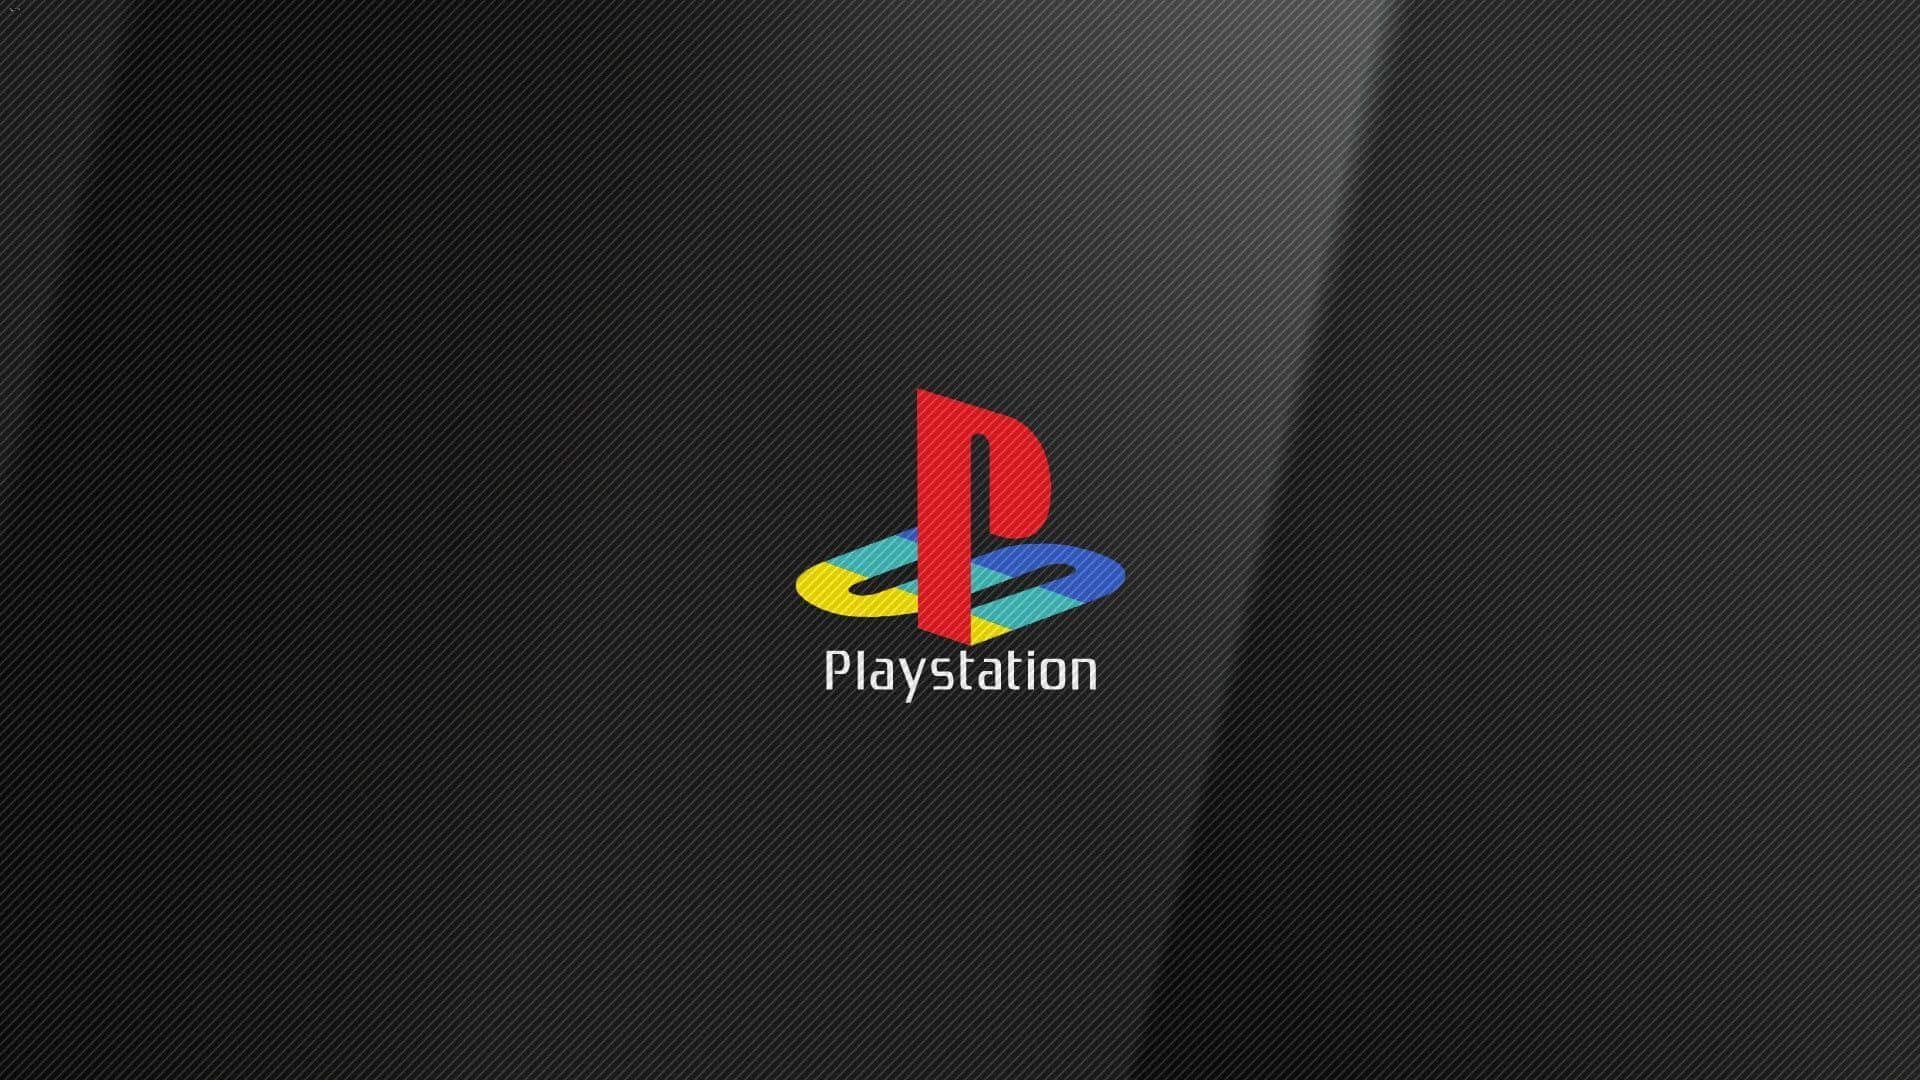 "Unlock Your Imagination with Playstation".